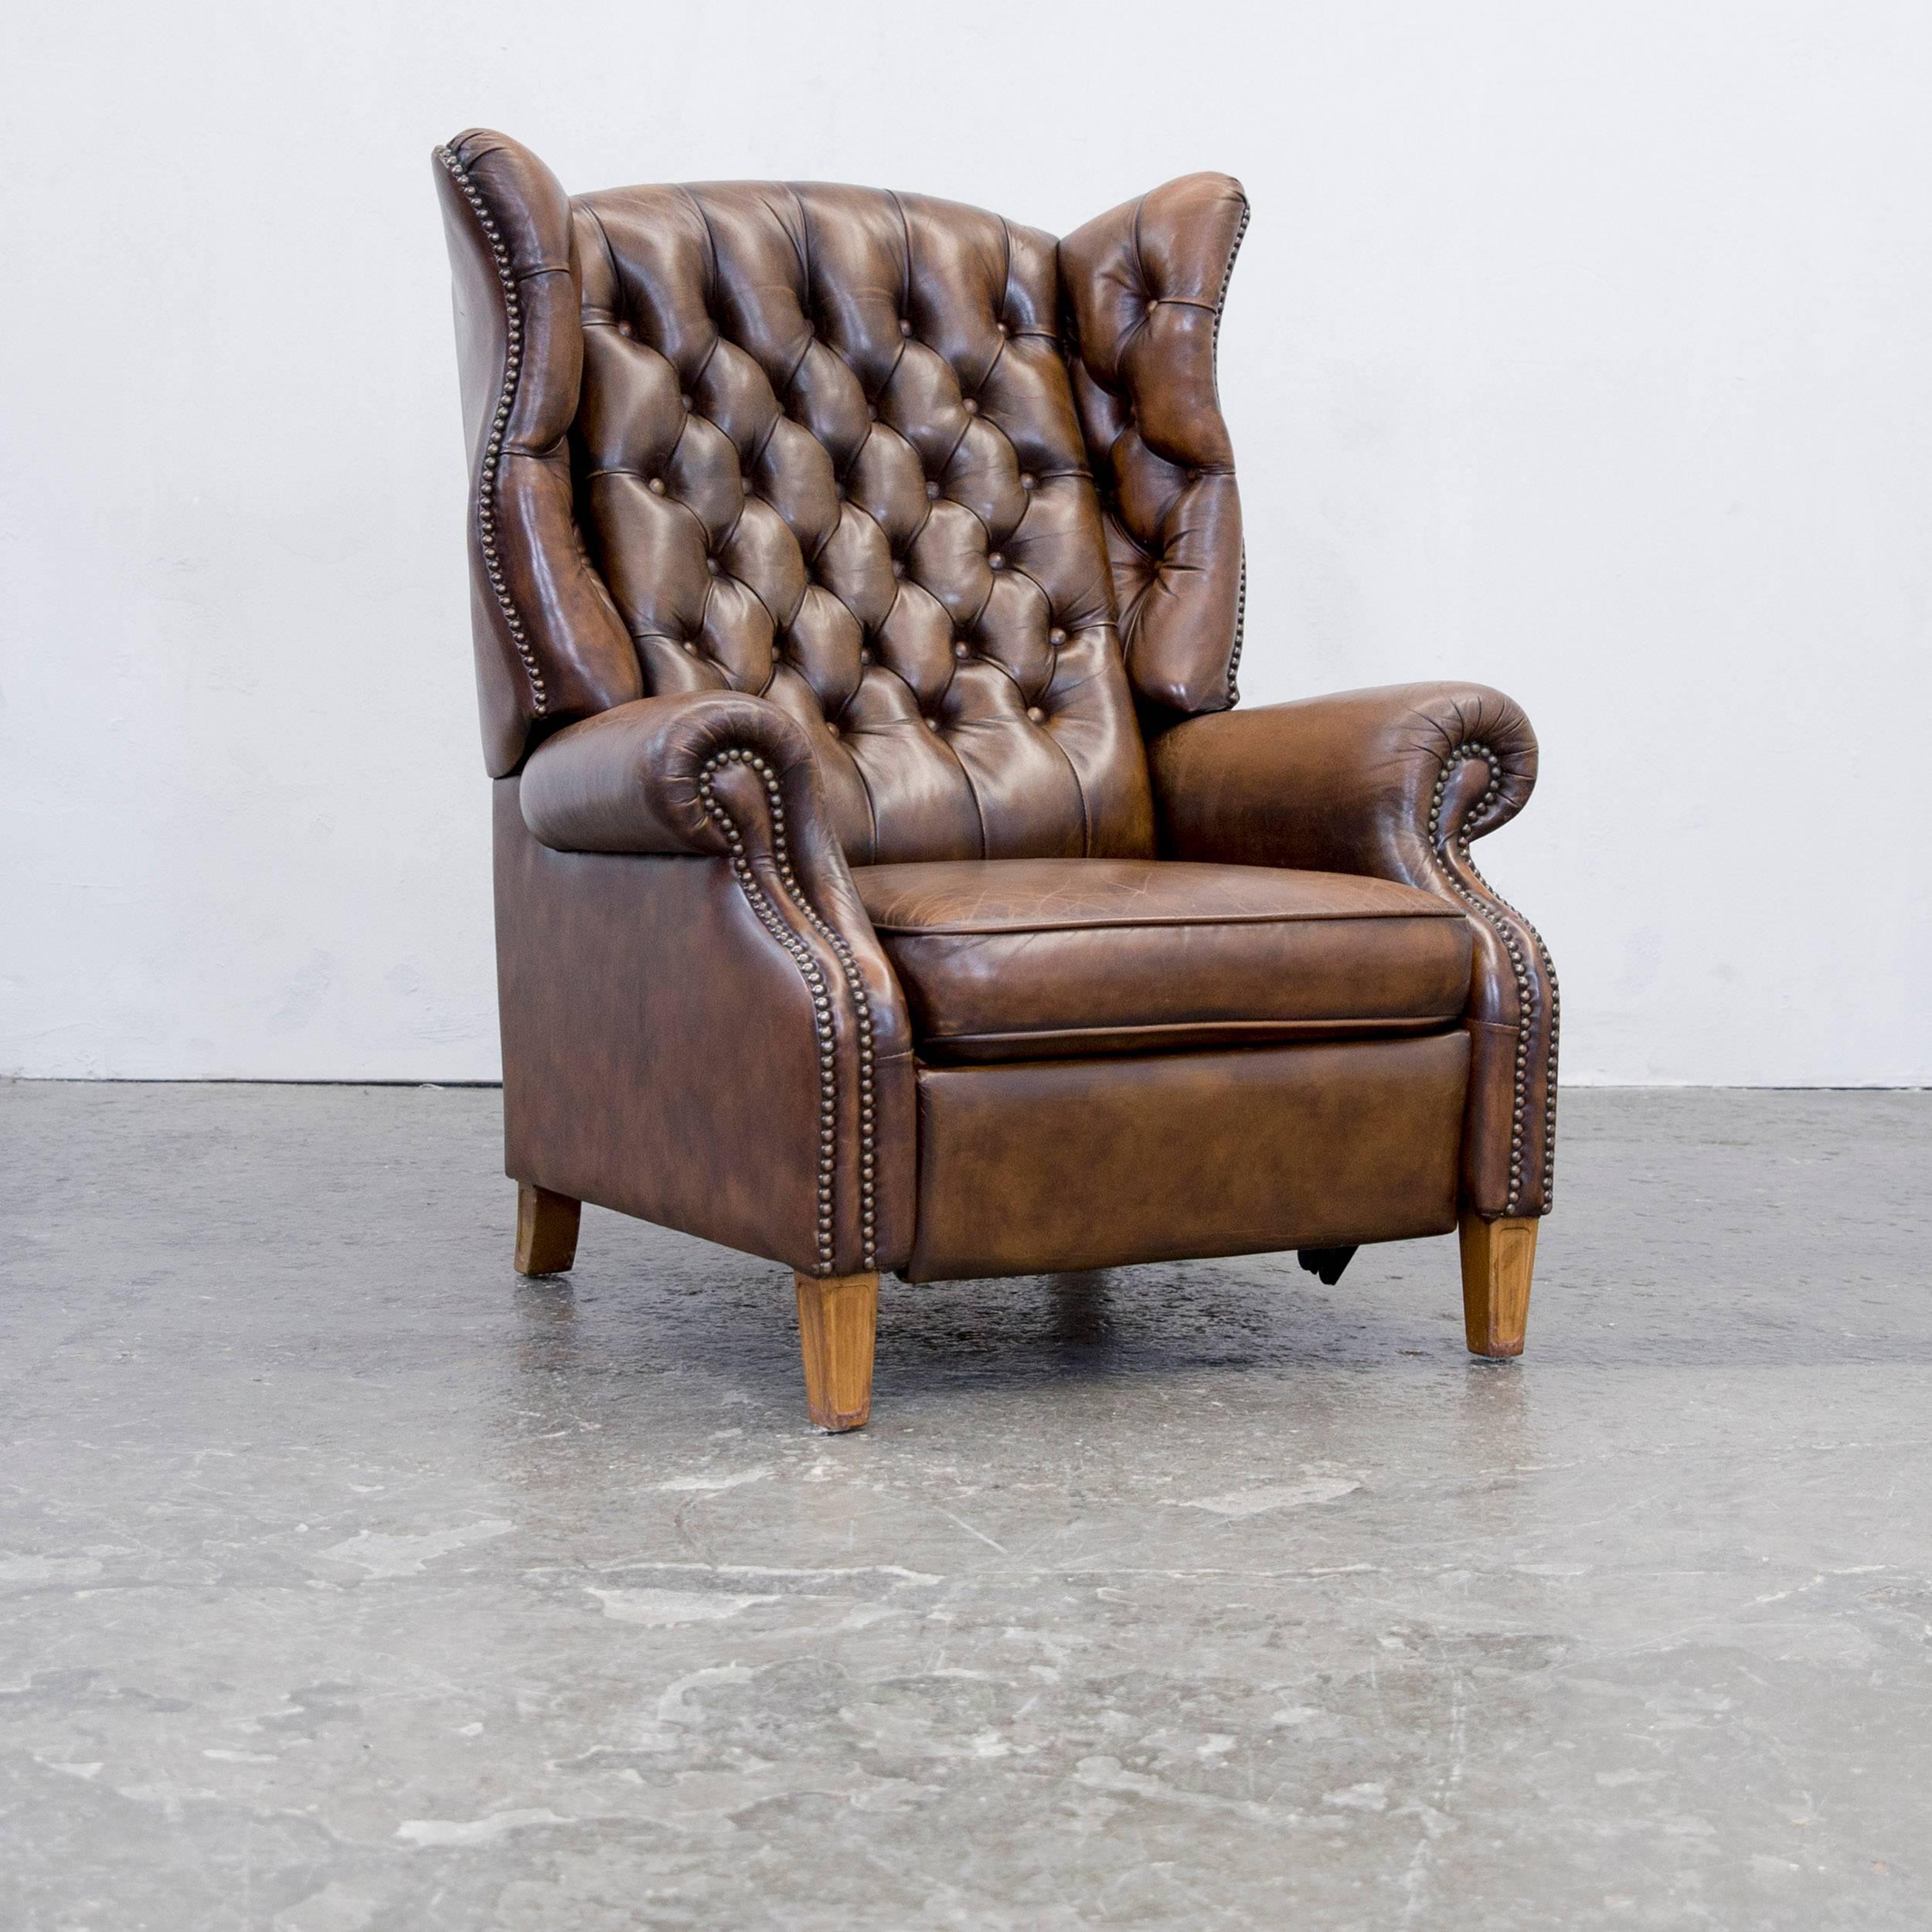 Authentic leather armchair with recline funktion in brown.